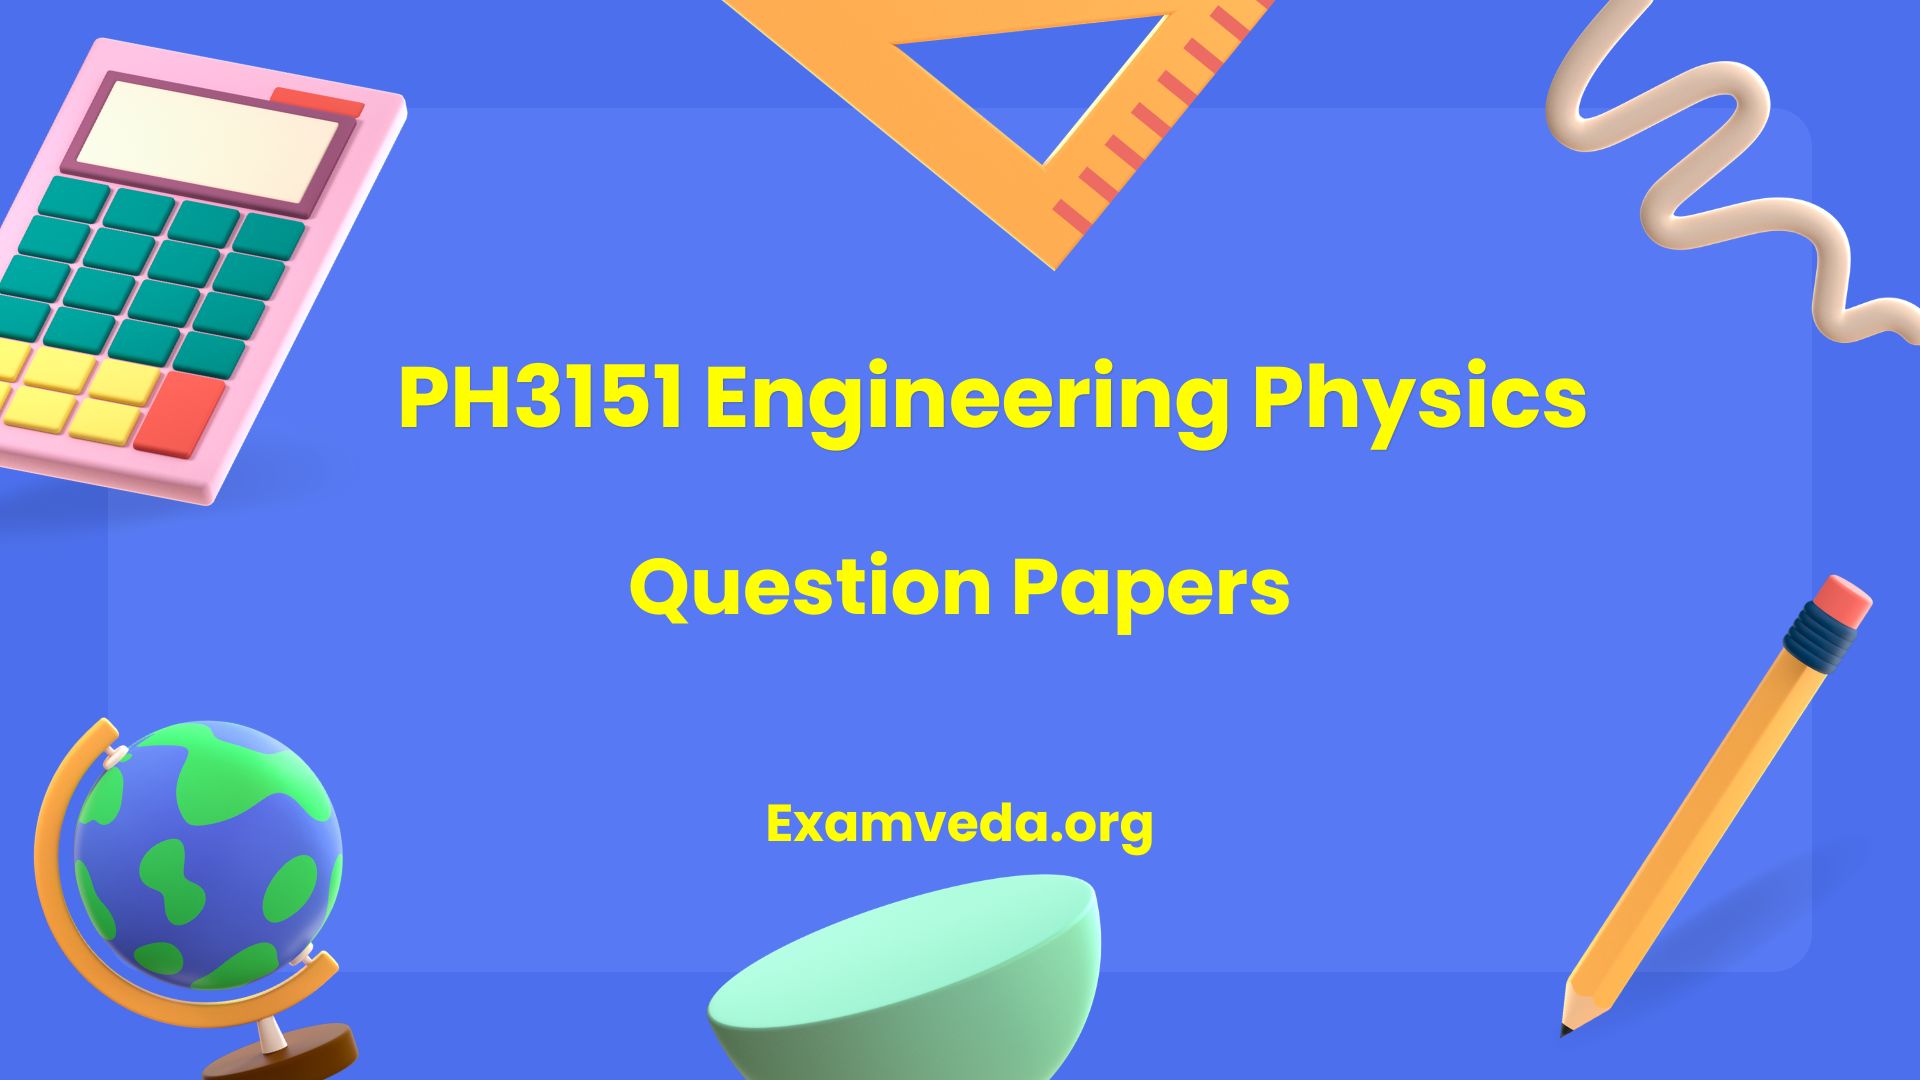 PH3151 Engineering Physics Question Papers